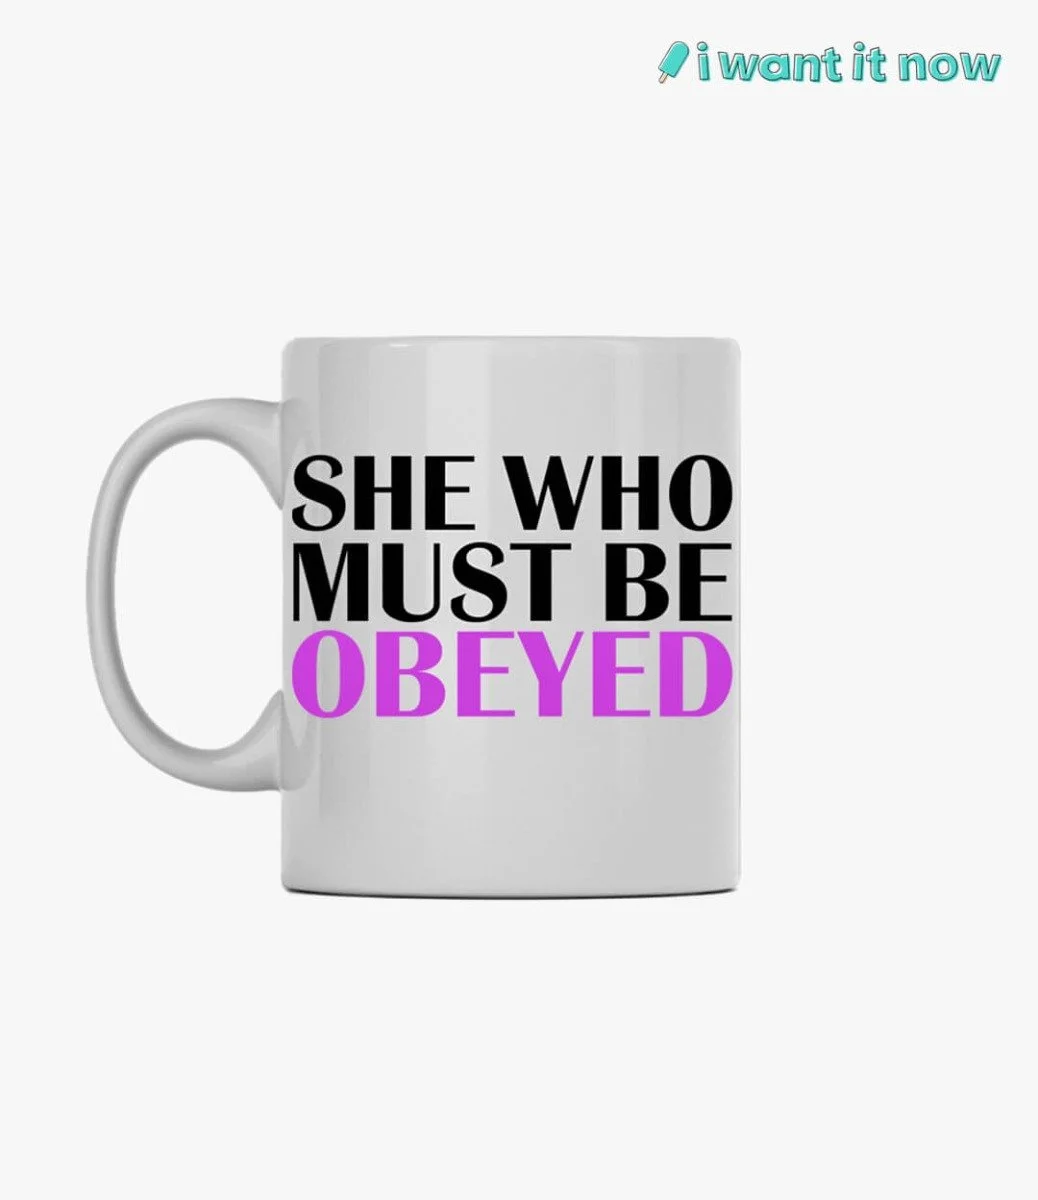 She who must be obeyed Mug By I Want It Now